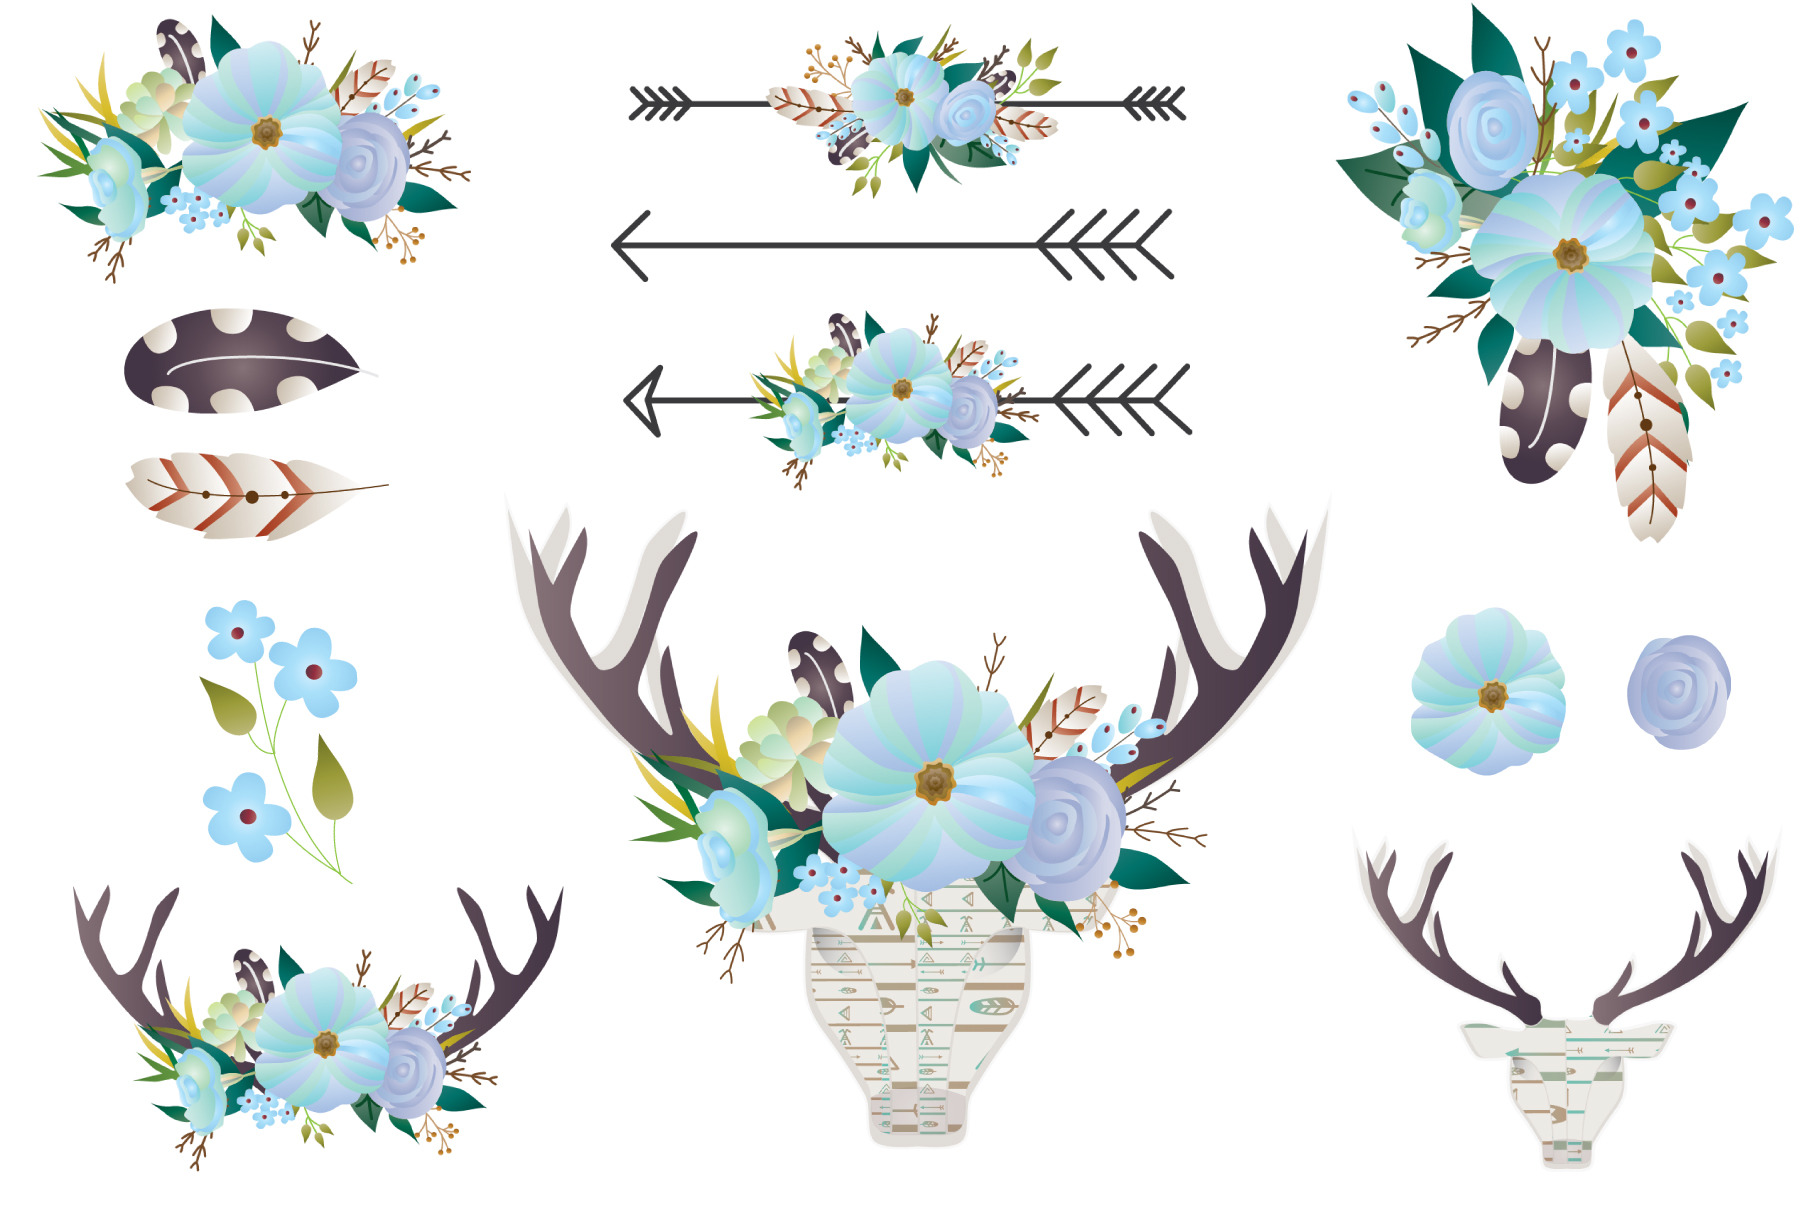 Boho Floral clip art - Deer antlers ~ Graphic Objects ...